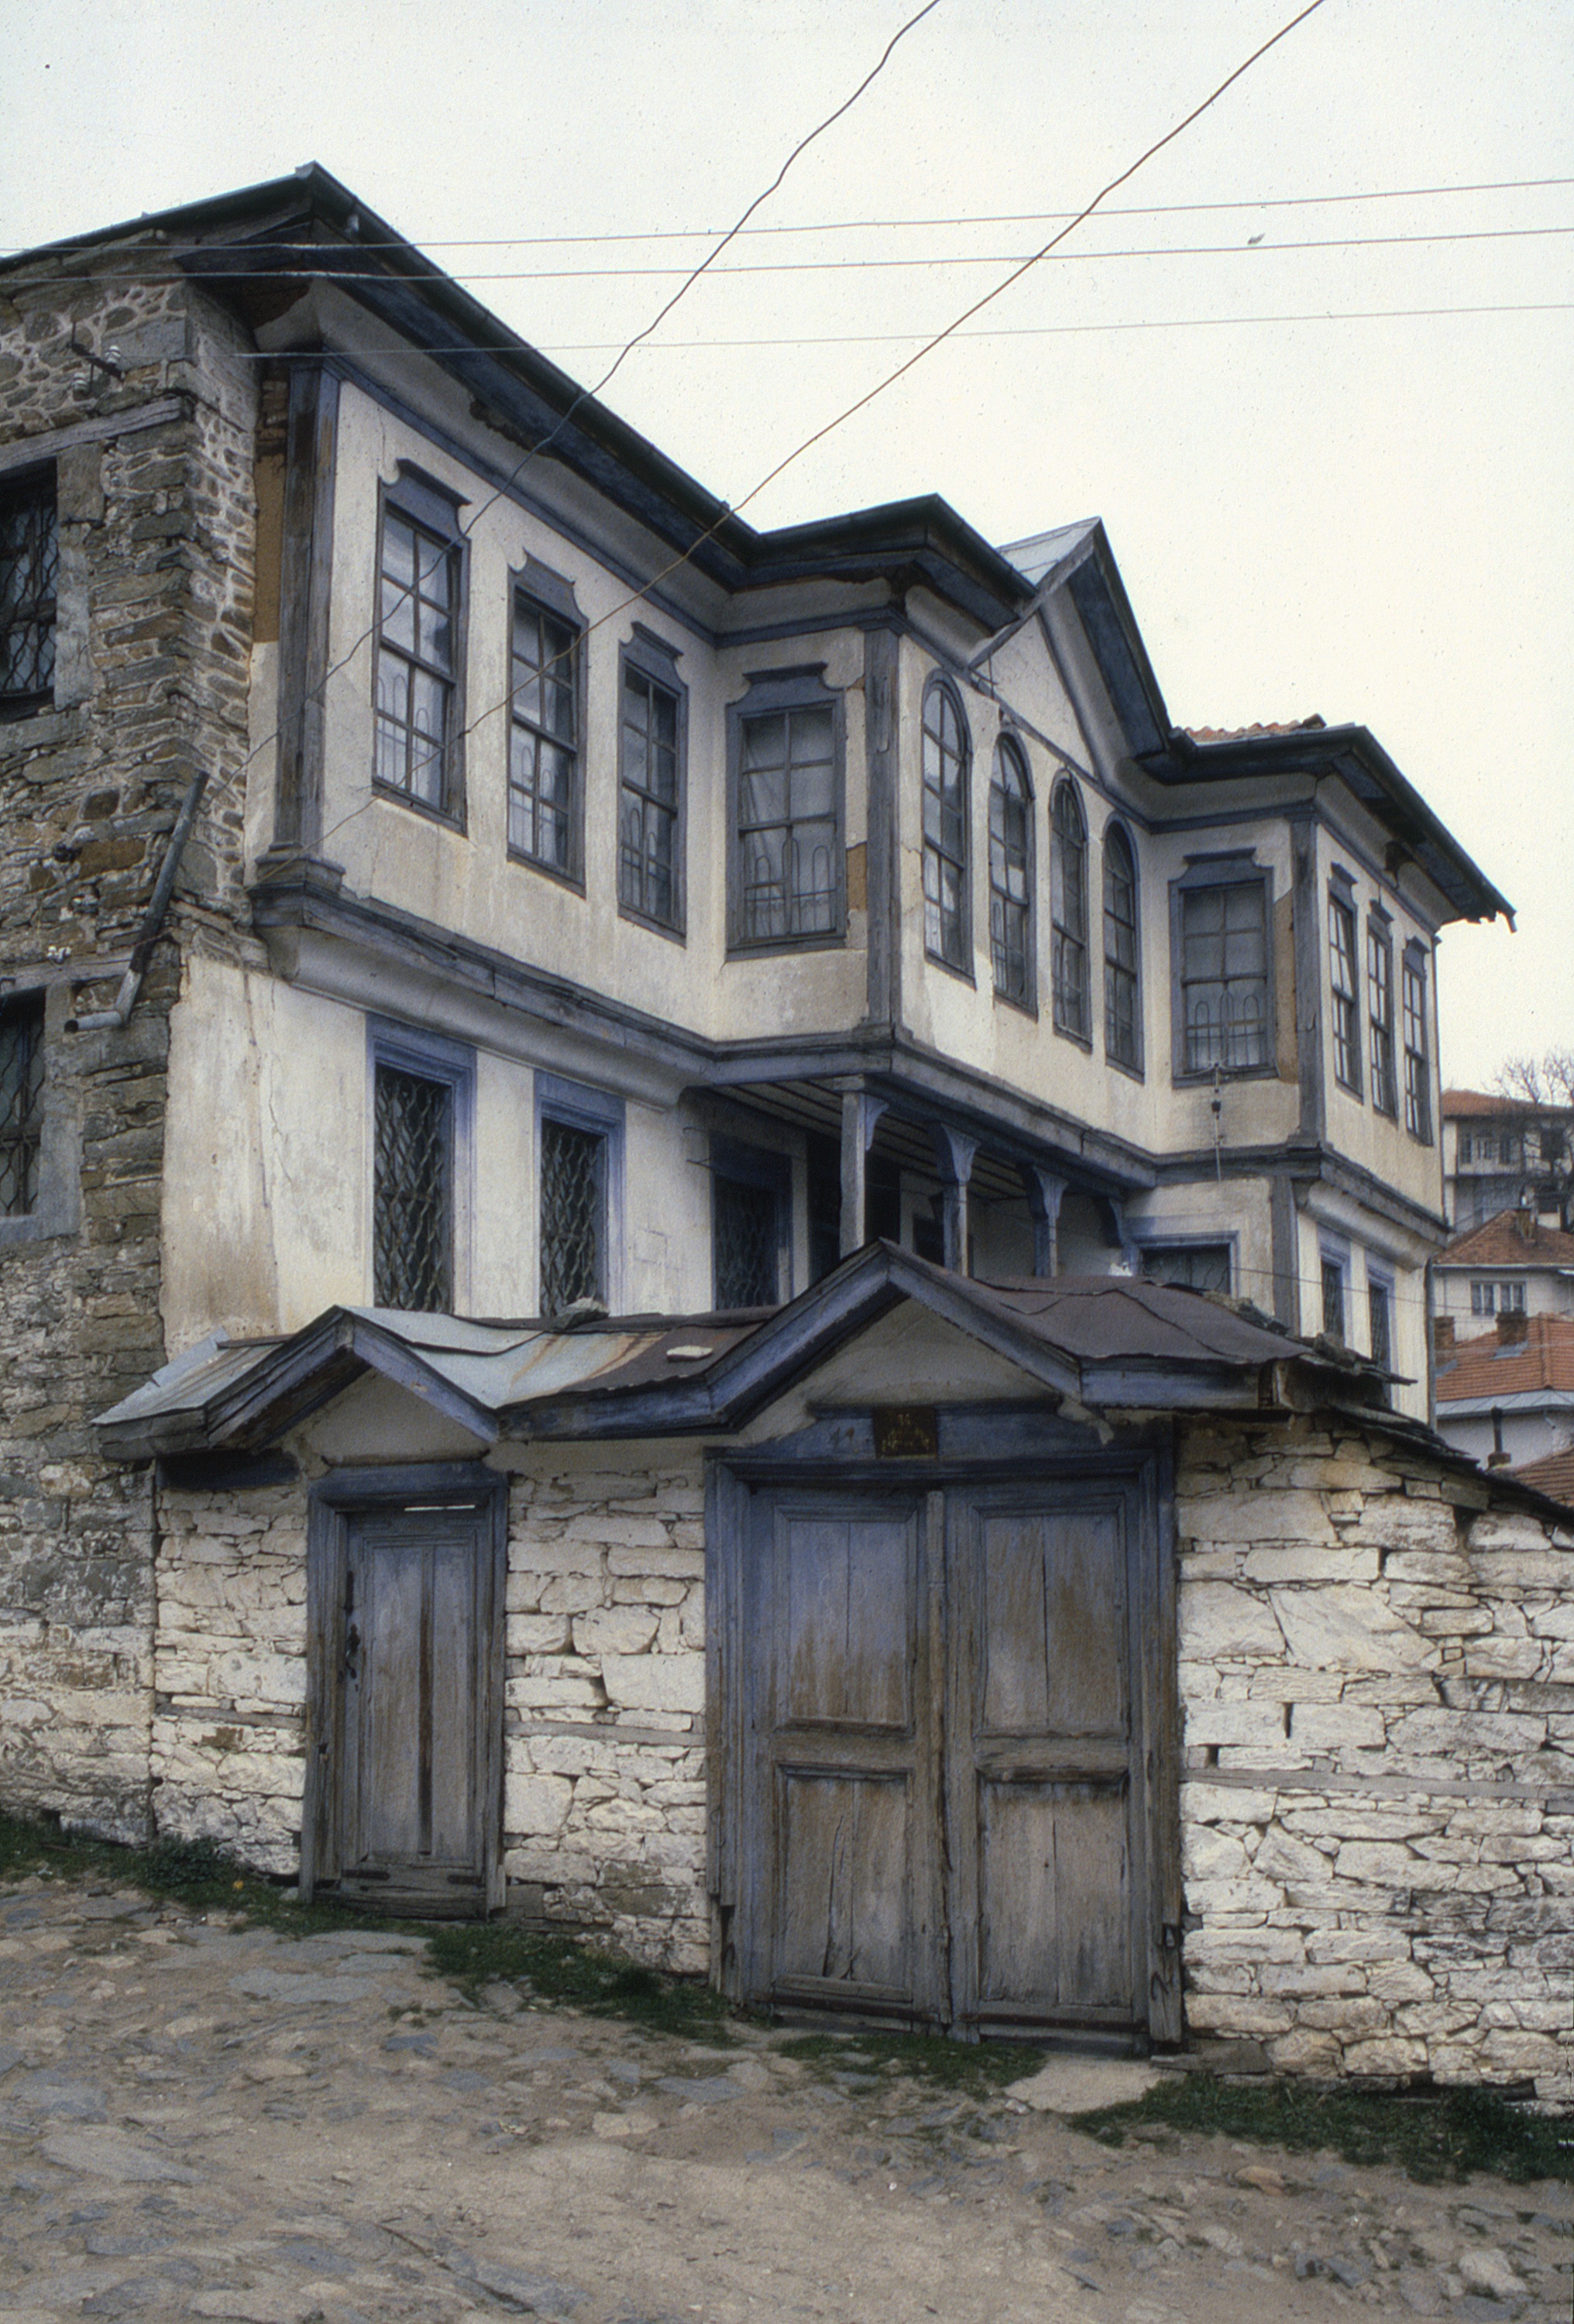 <p>This kuќa, also known as the Gurković House, is noted for its refined proportions and stepped facade. The ground level contains three storage rooms (ќevar) and an interior stair to the intermediate level. The intermediate level is reached by an exterior stair allowing one to enter a čardak with doorways to three living rooms (odaja) each with a fire place. The uppermost level is reached by an interior stair to its central čardak. This level has one large guest room (gostinska odaja) on the west side of the čardak and two other rooms on the east side.</p>